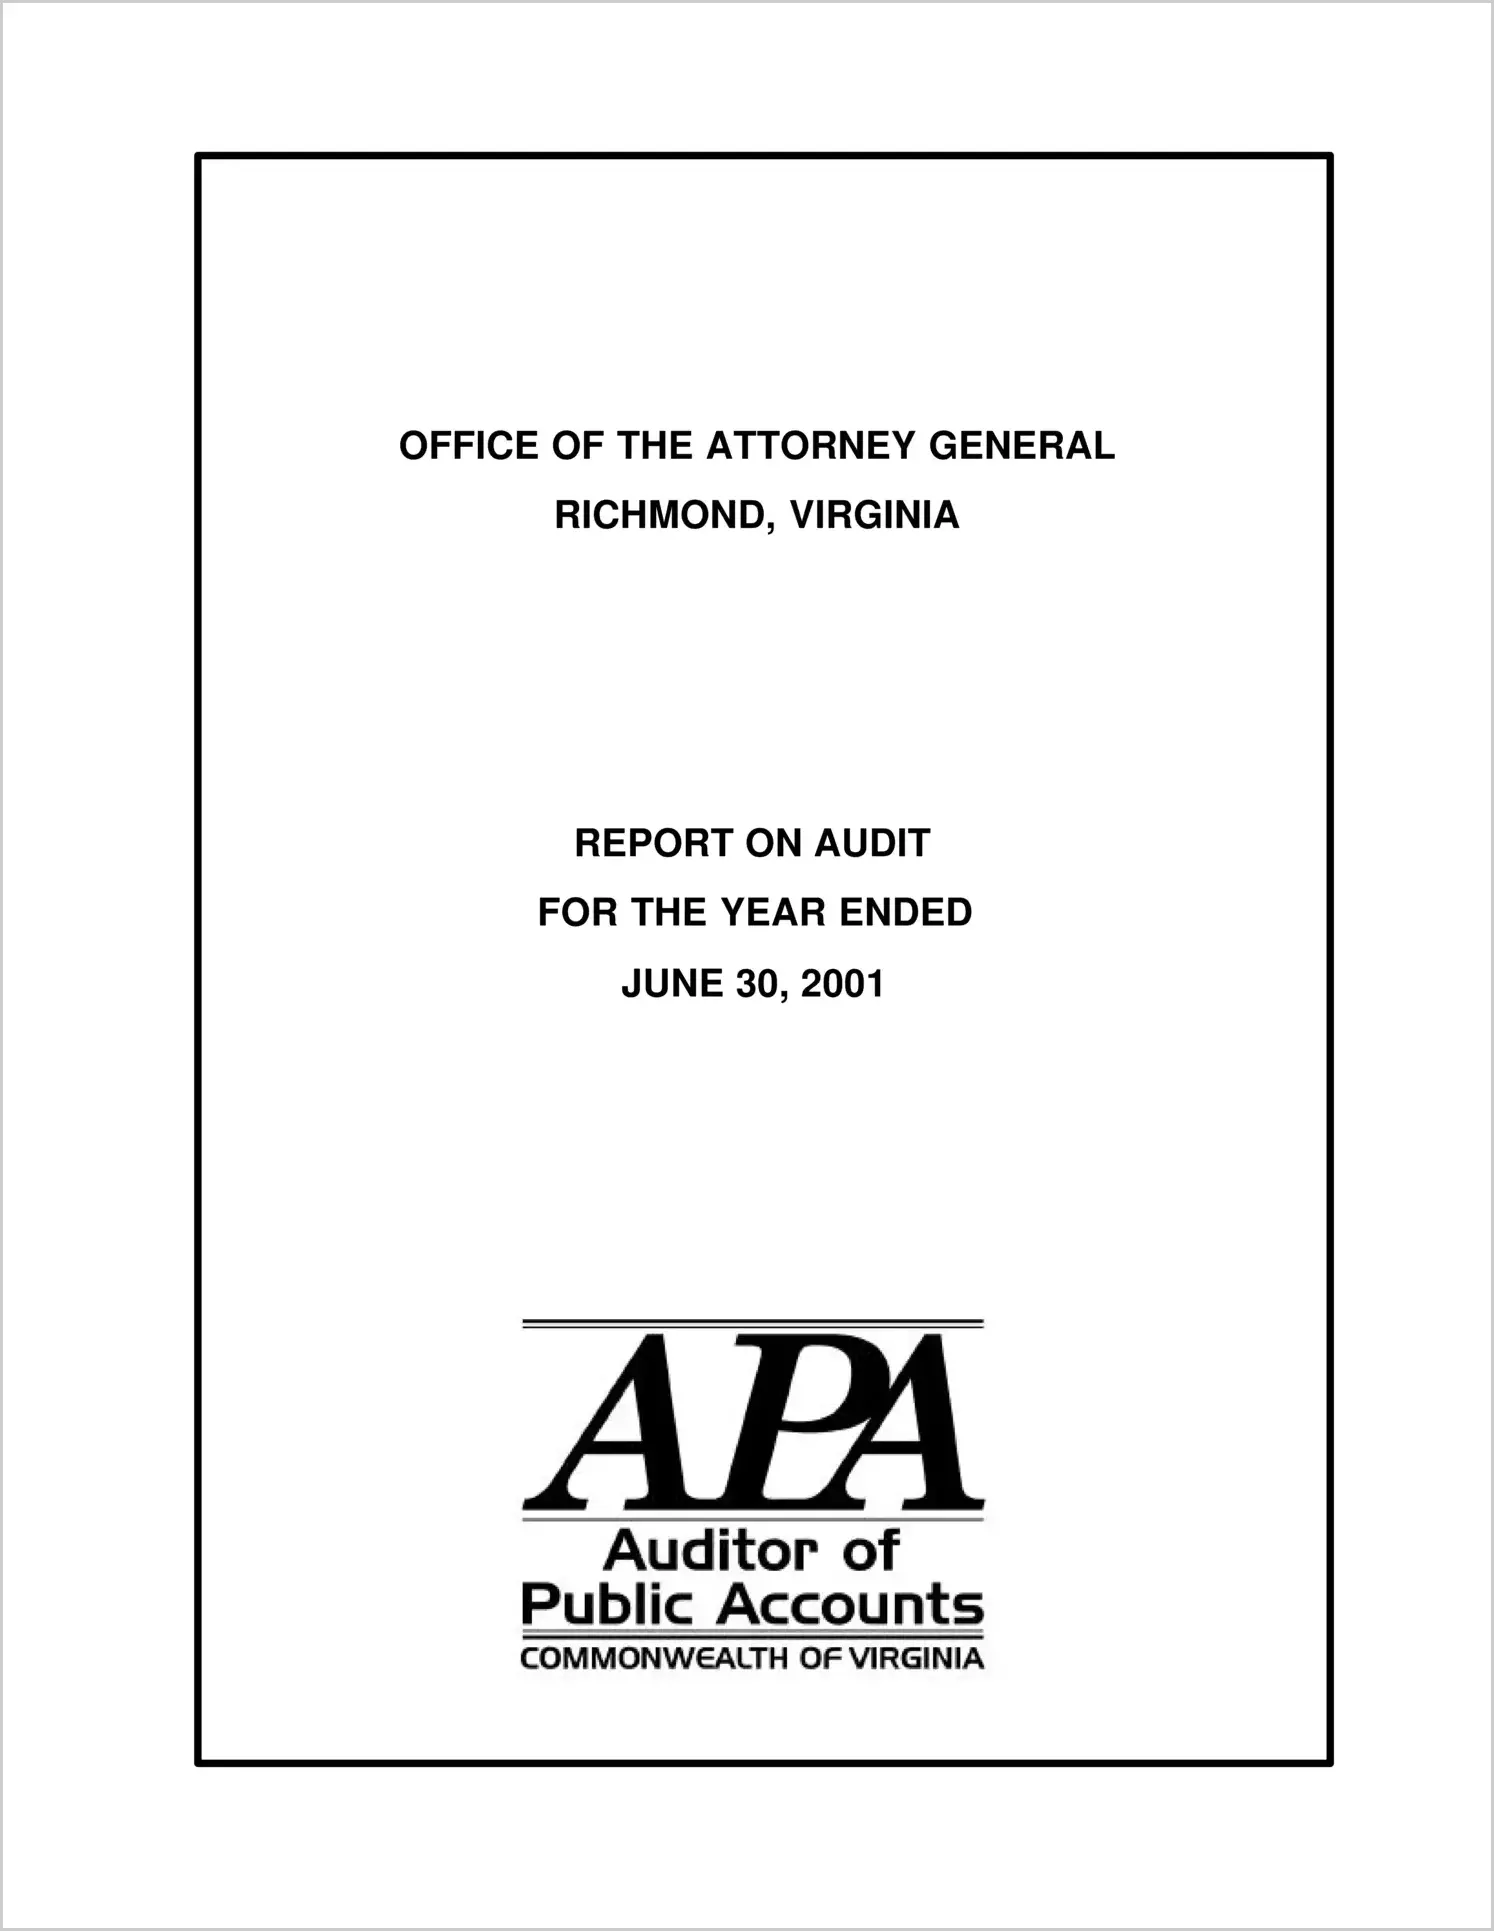 Office of the Attorney General for the year ended June 30, 2001